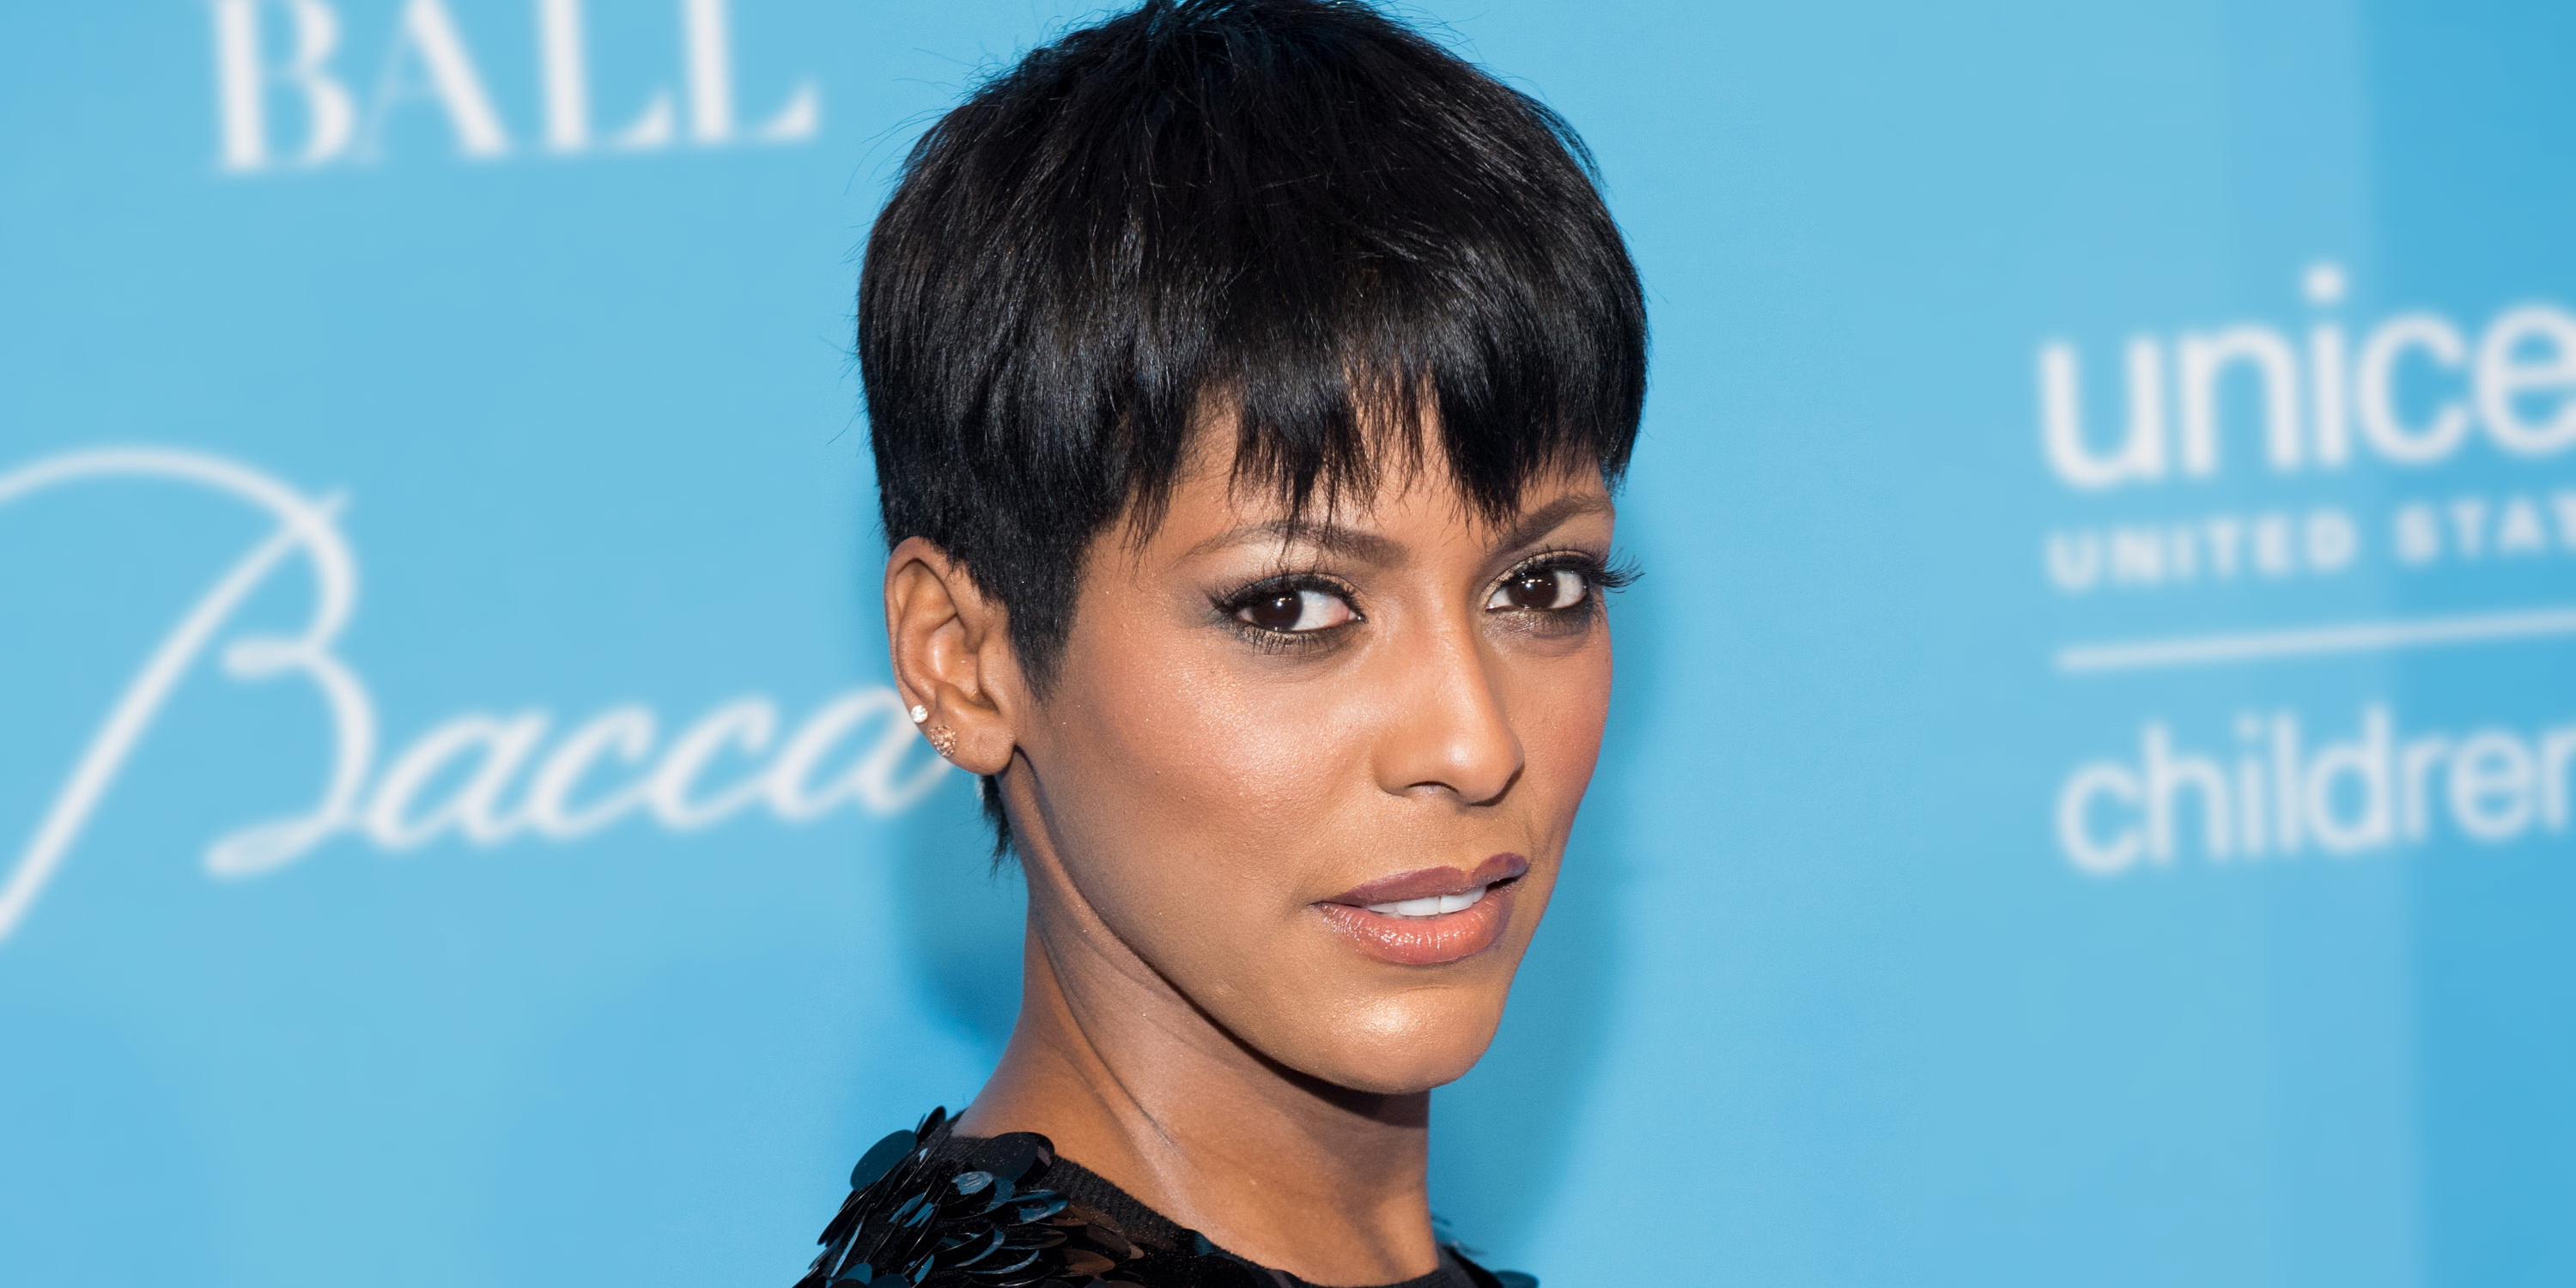 Lawrence tamron hall dating Who is